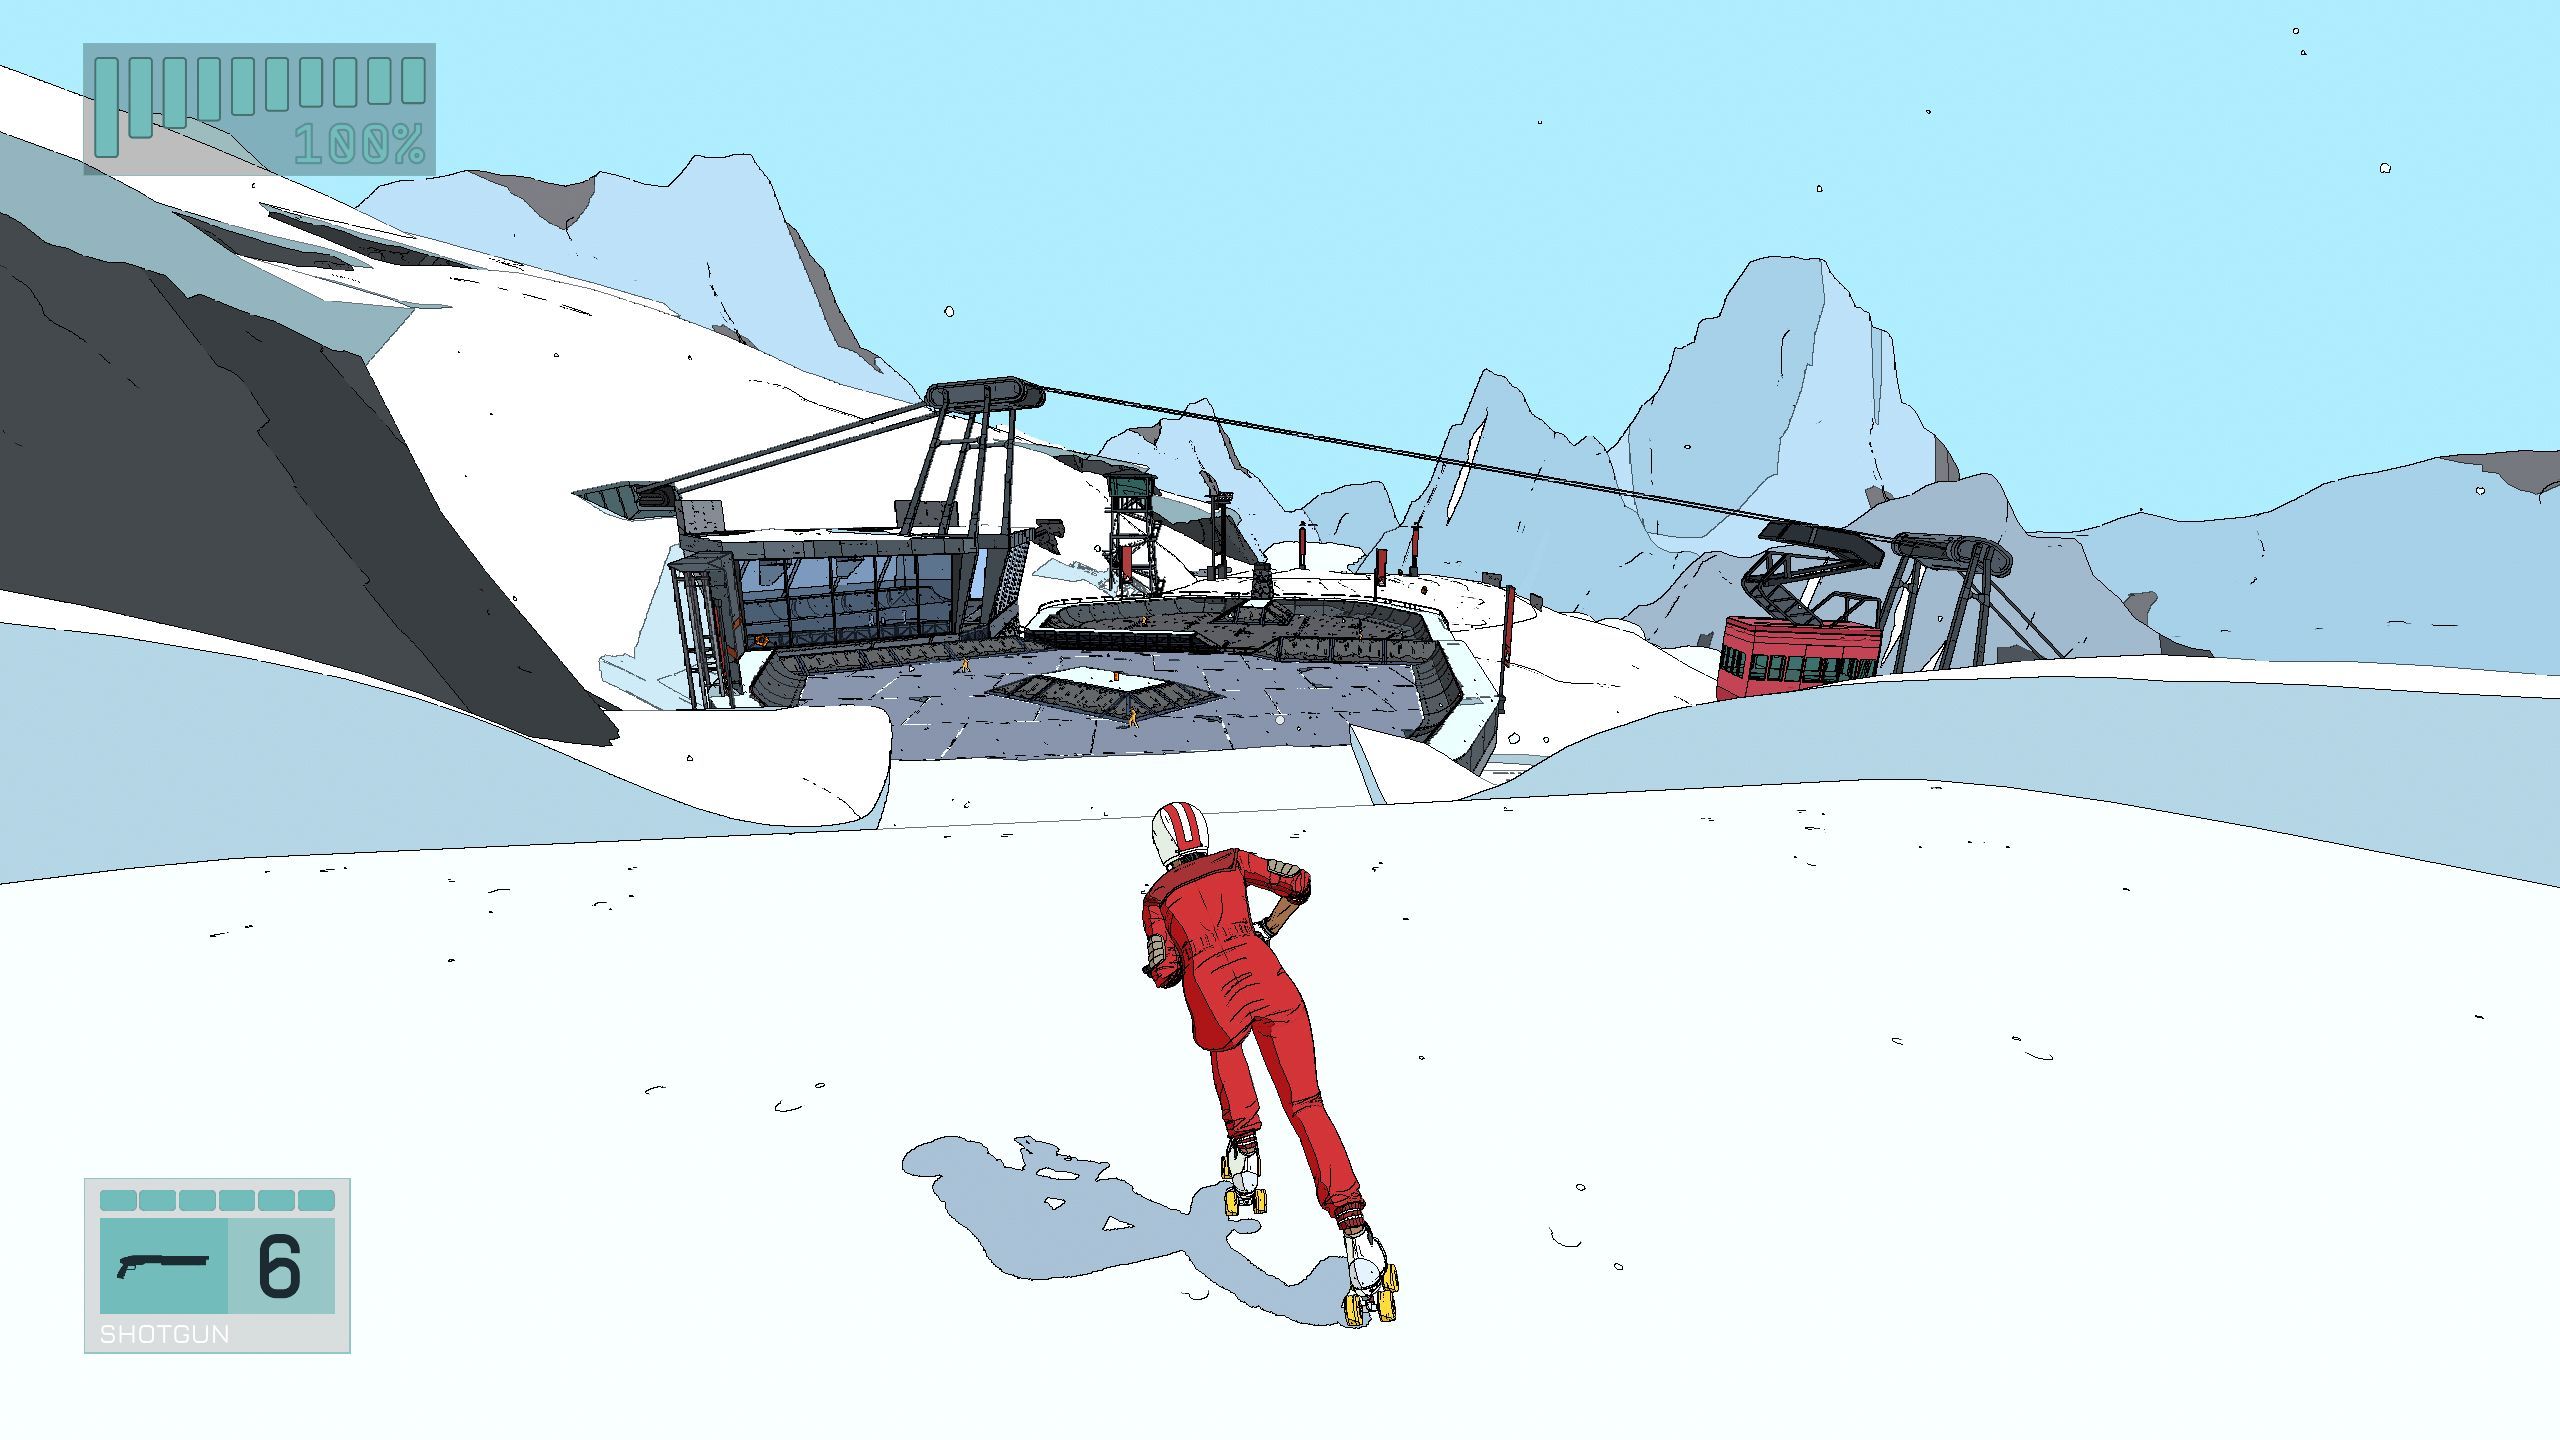 A woman in a red jump suit rollerskates over snowy terrain in Rollerdrom